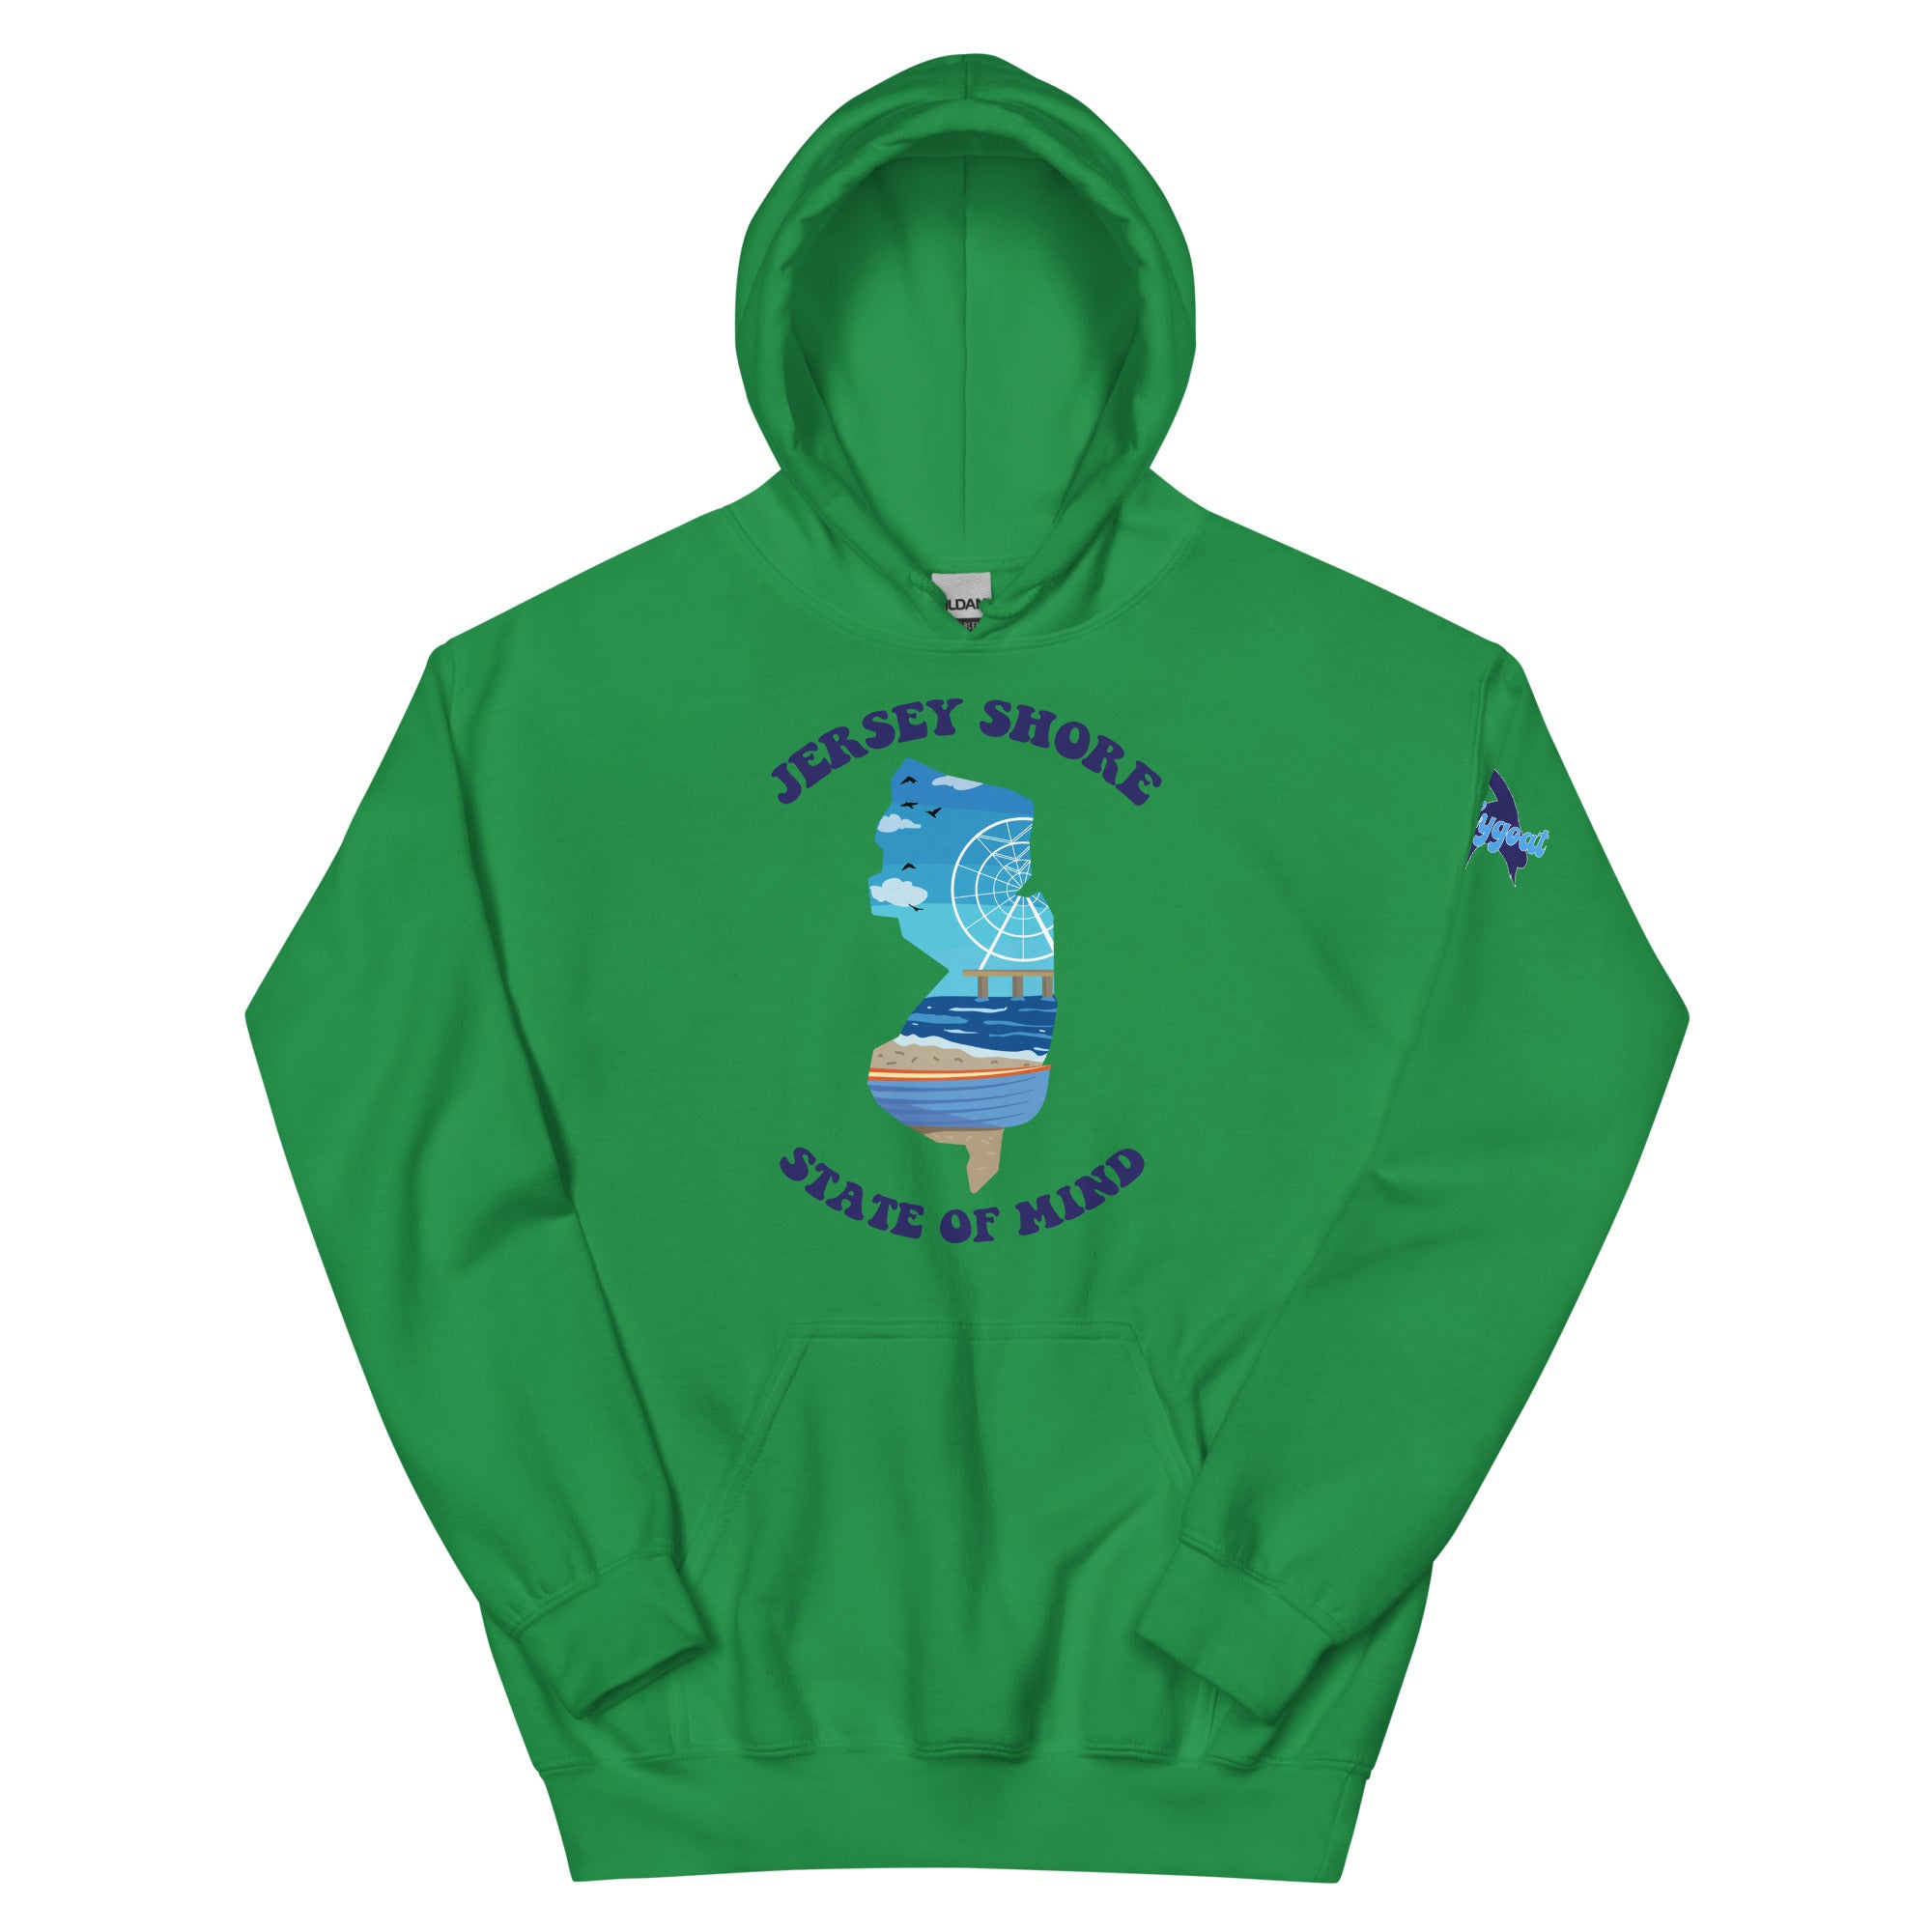 "Jersey Shore State of Mind" Hoodie